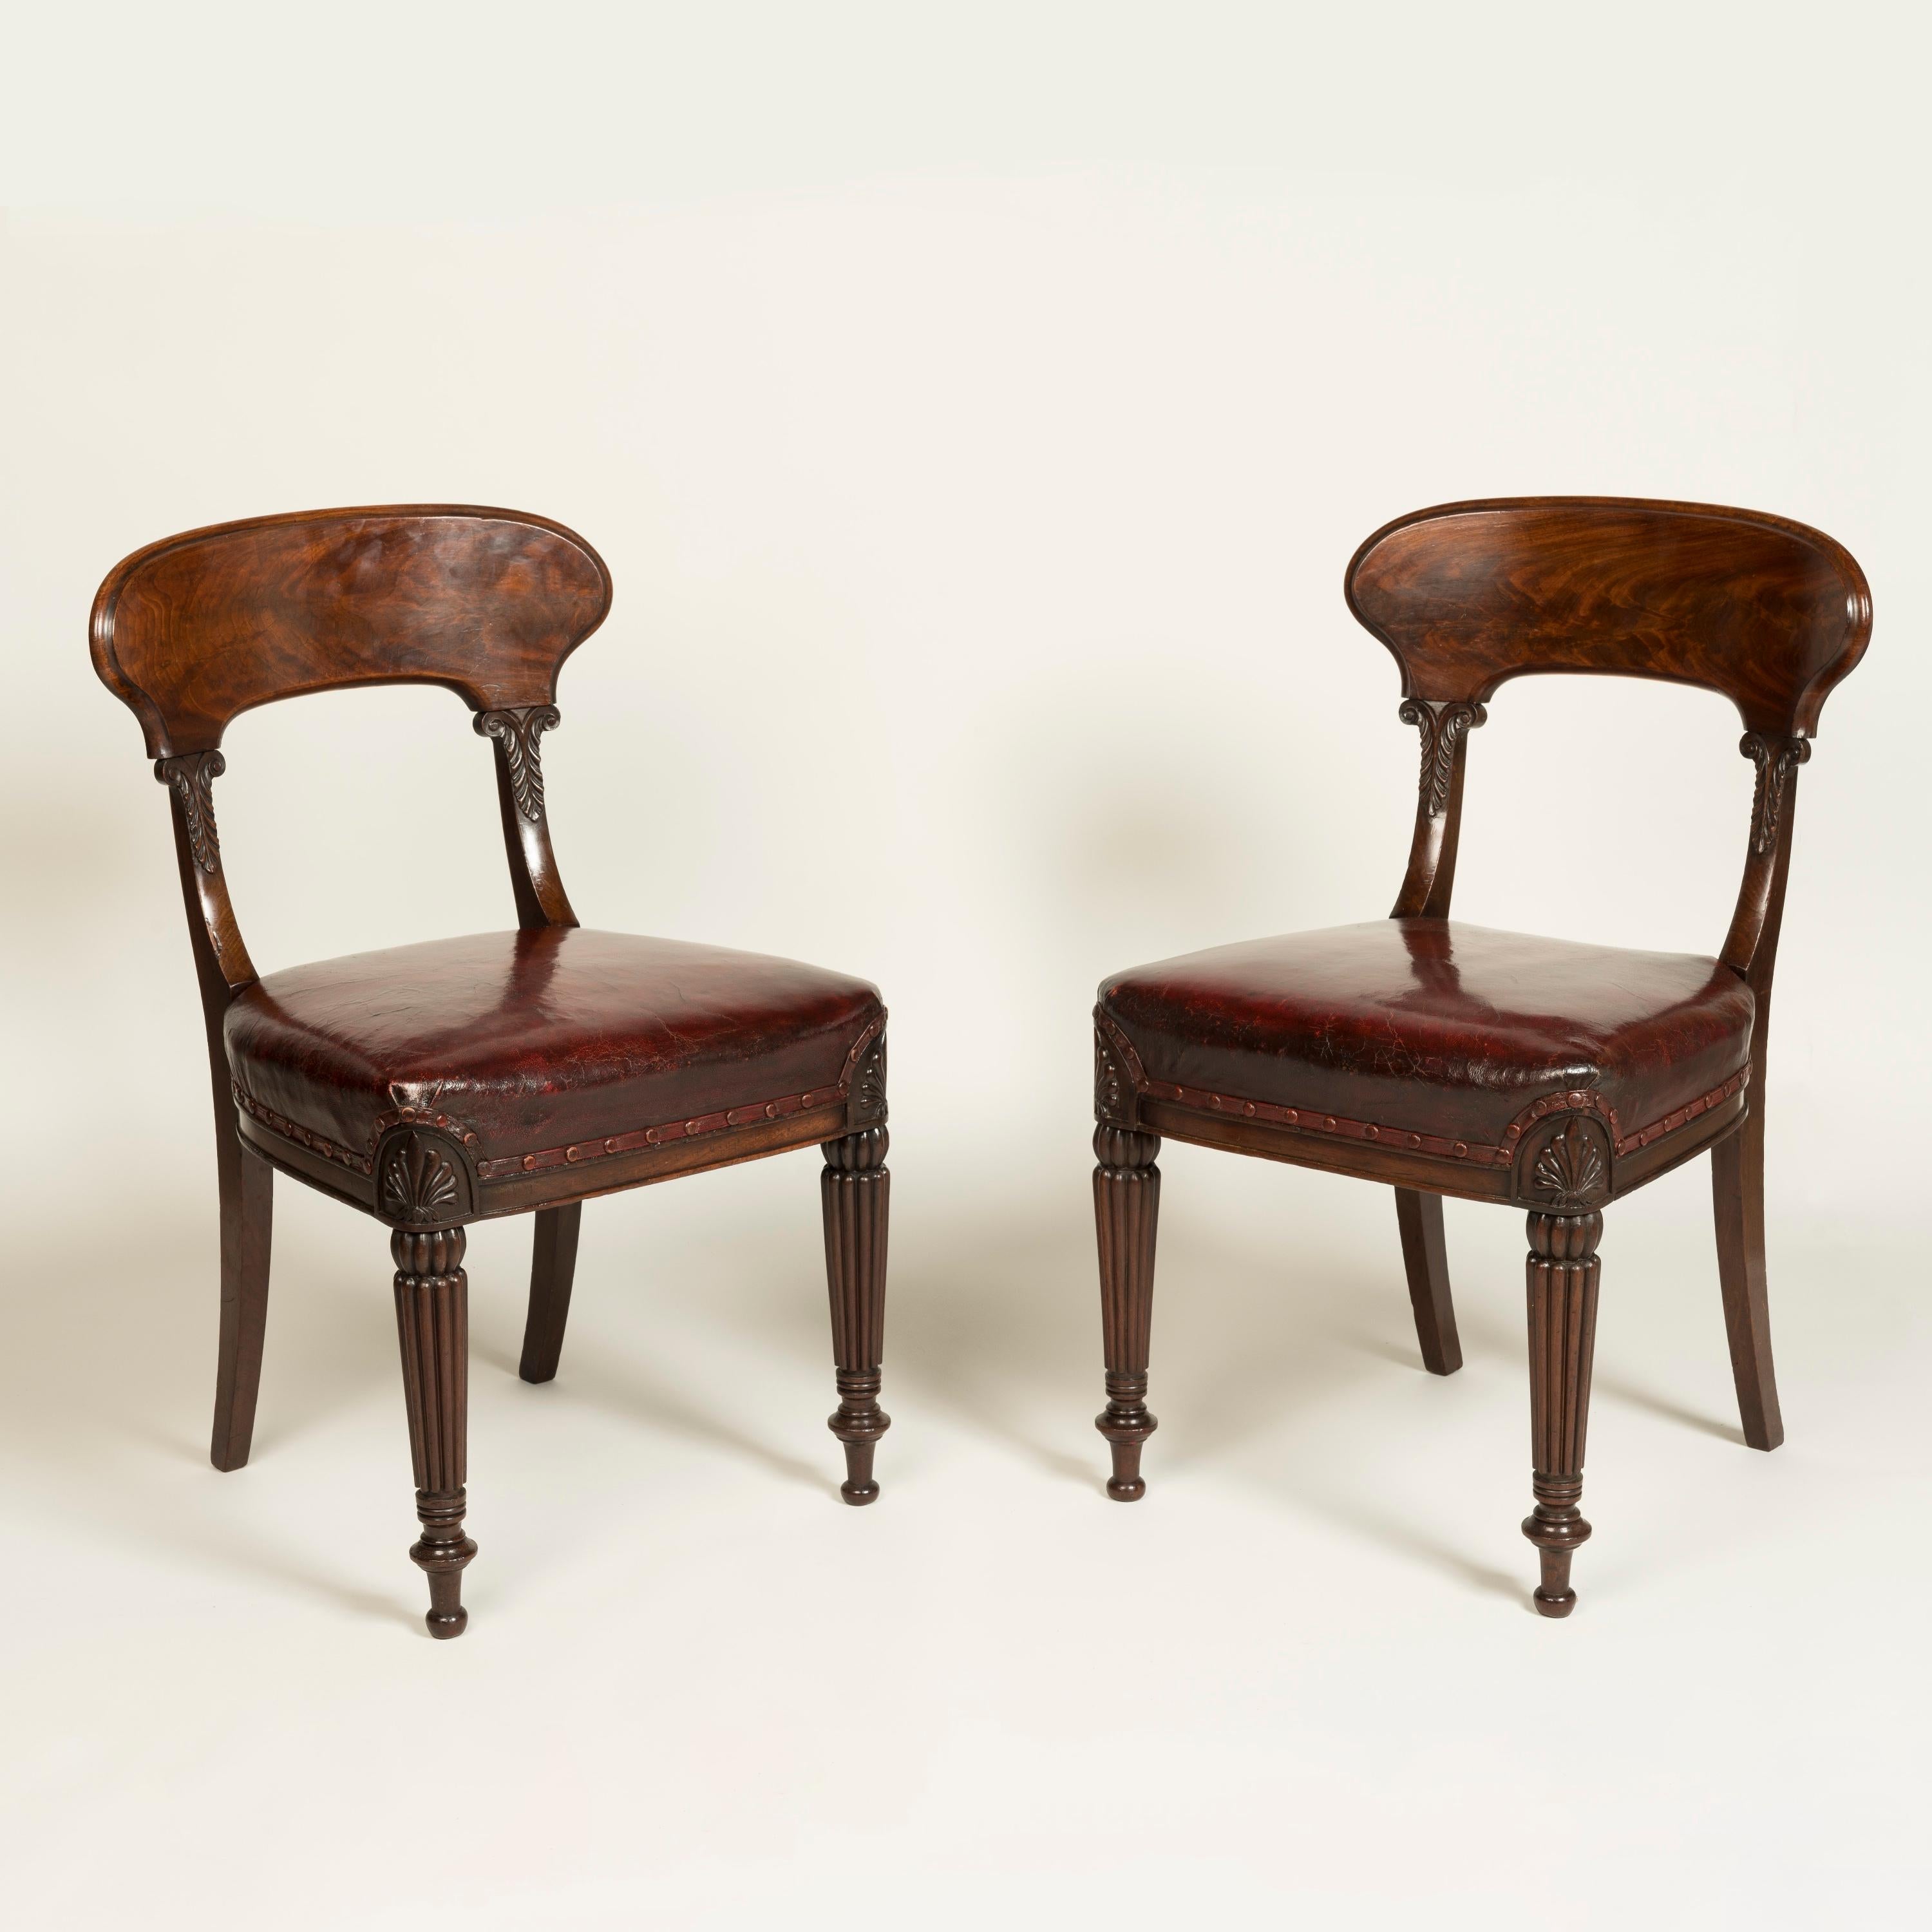 A Fine set of Twelve George IV Dining Chairs
Attributed to Gillows of London & Lancaster

Constructed from flamed Cuban mahogany, with hand-carved details; supported on tapering, turned and reeded front legs headed by anthermion-carved corners